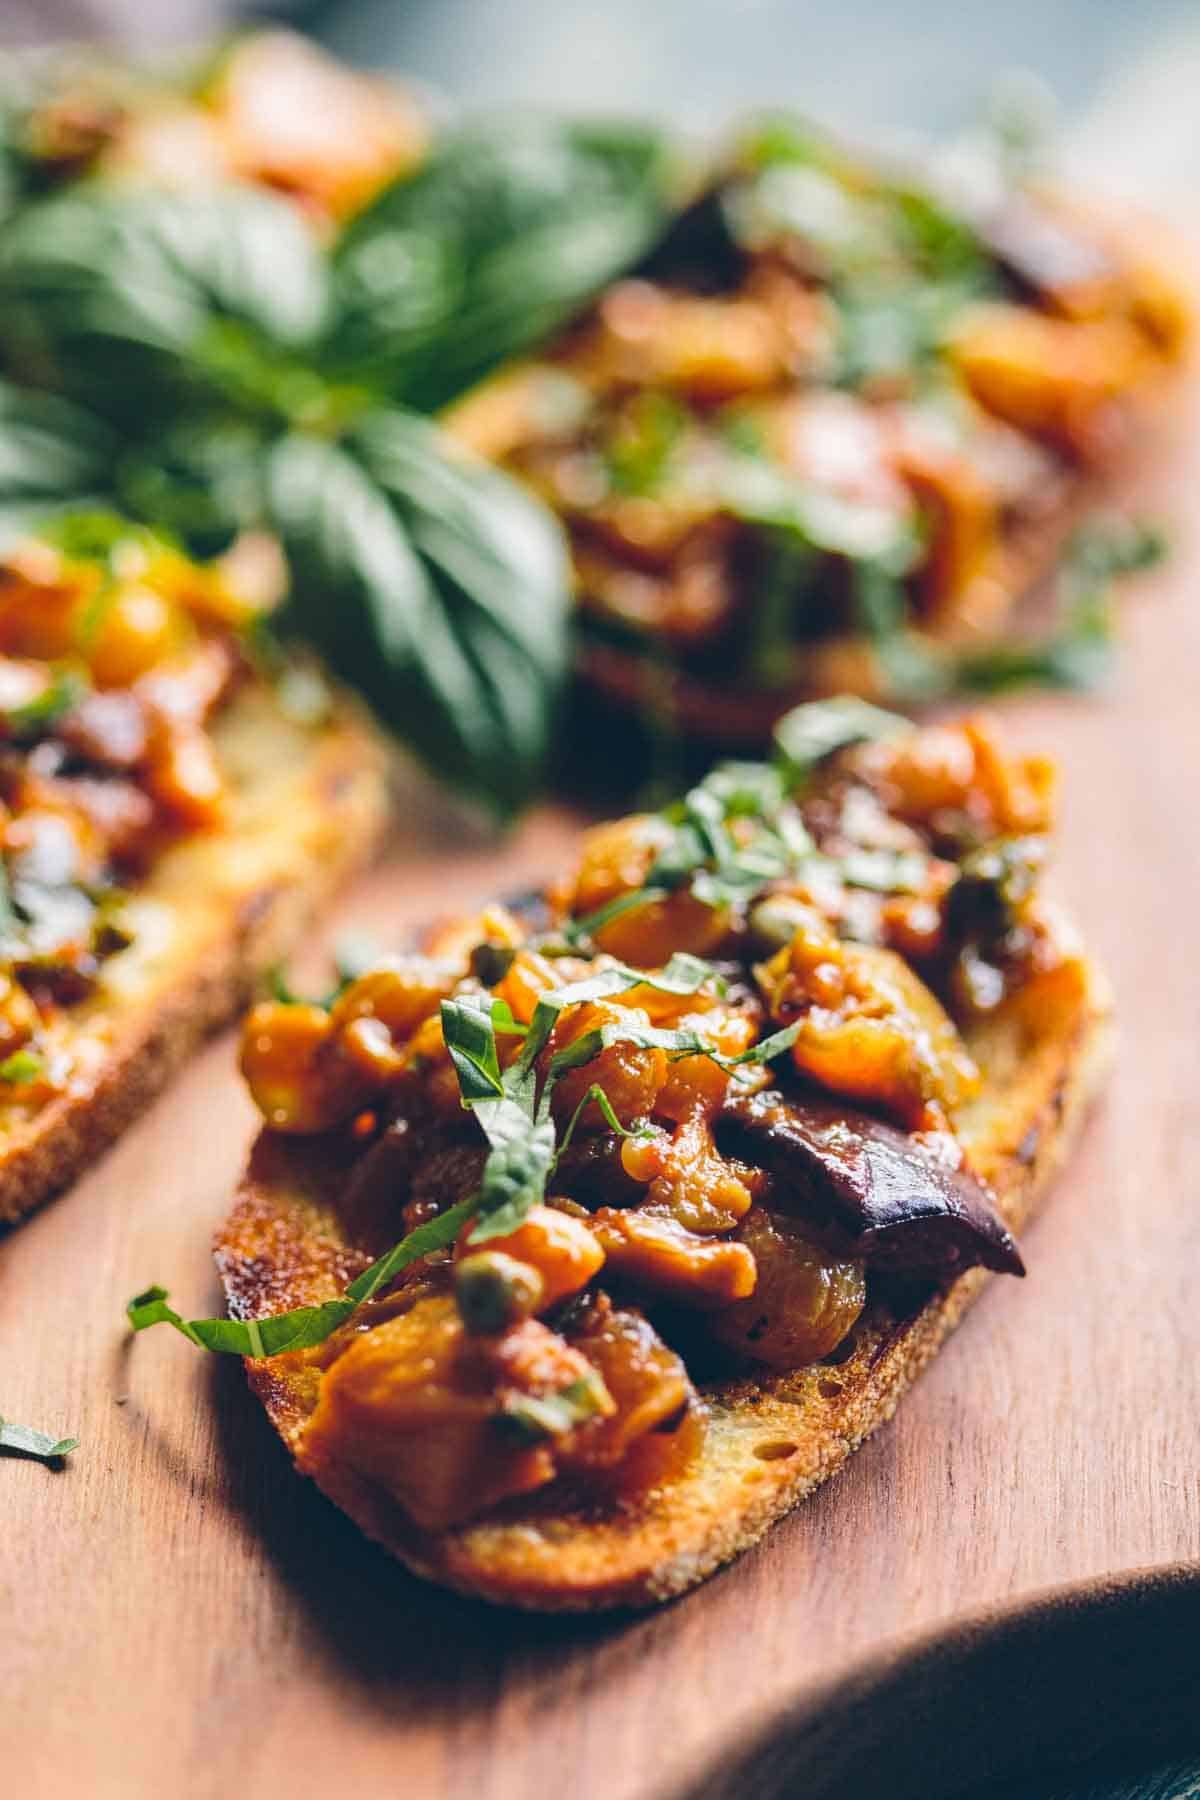 A tray of crostini with eggplant caponata on top and a sprig of basil.